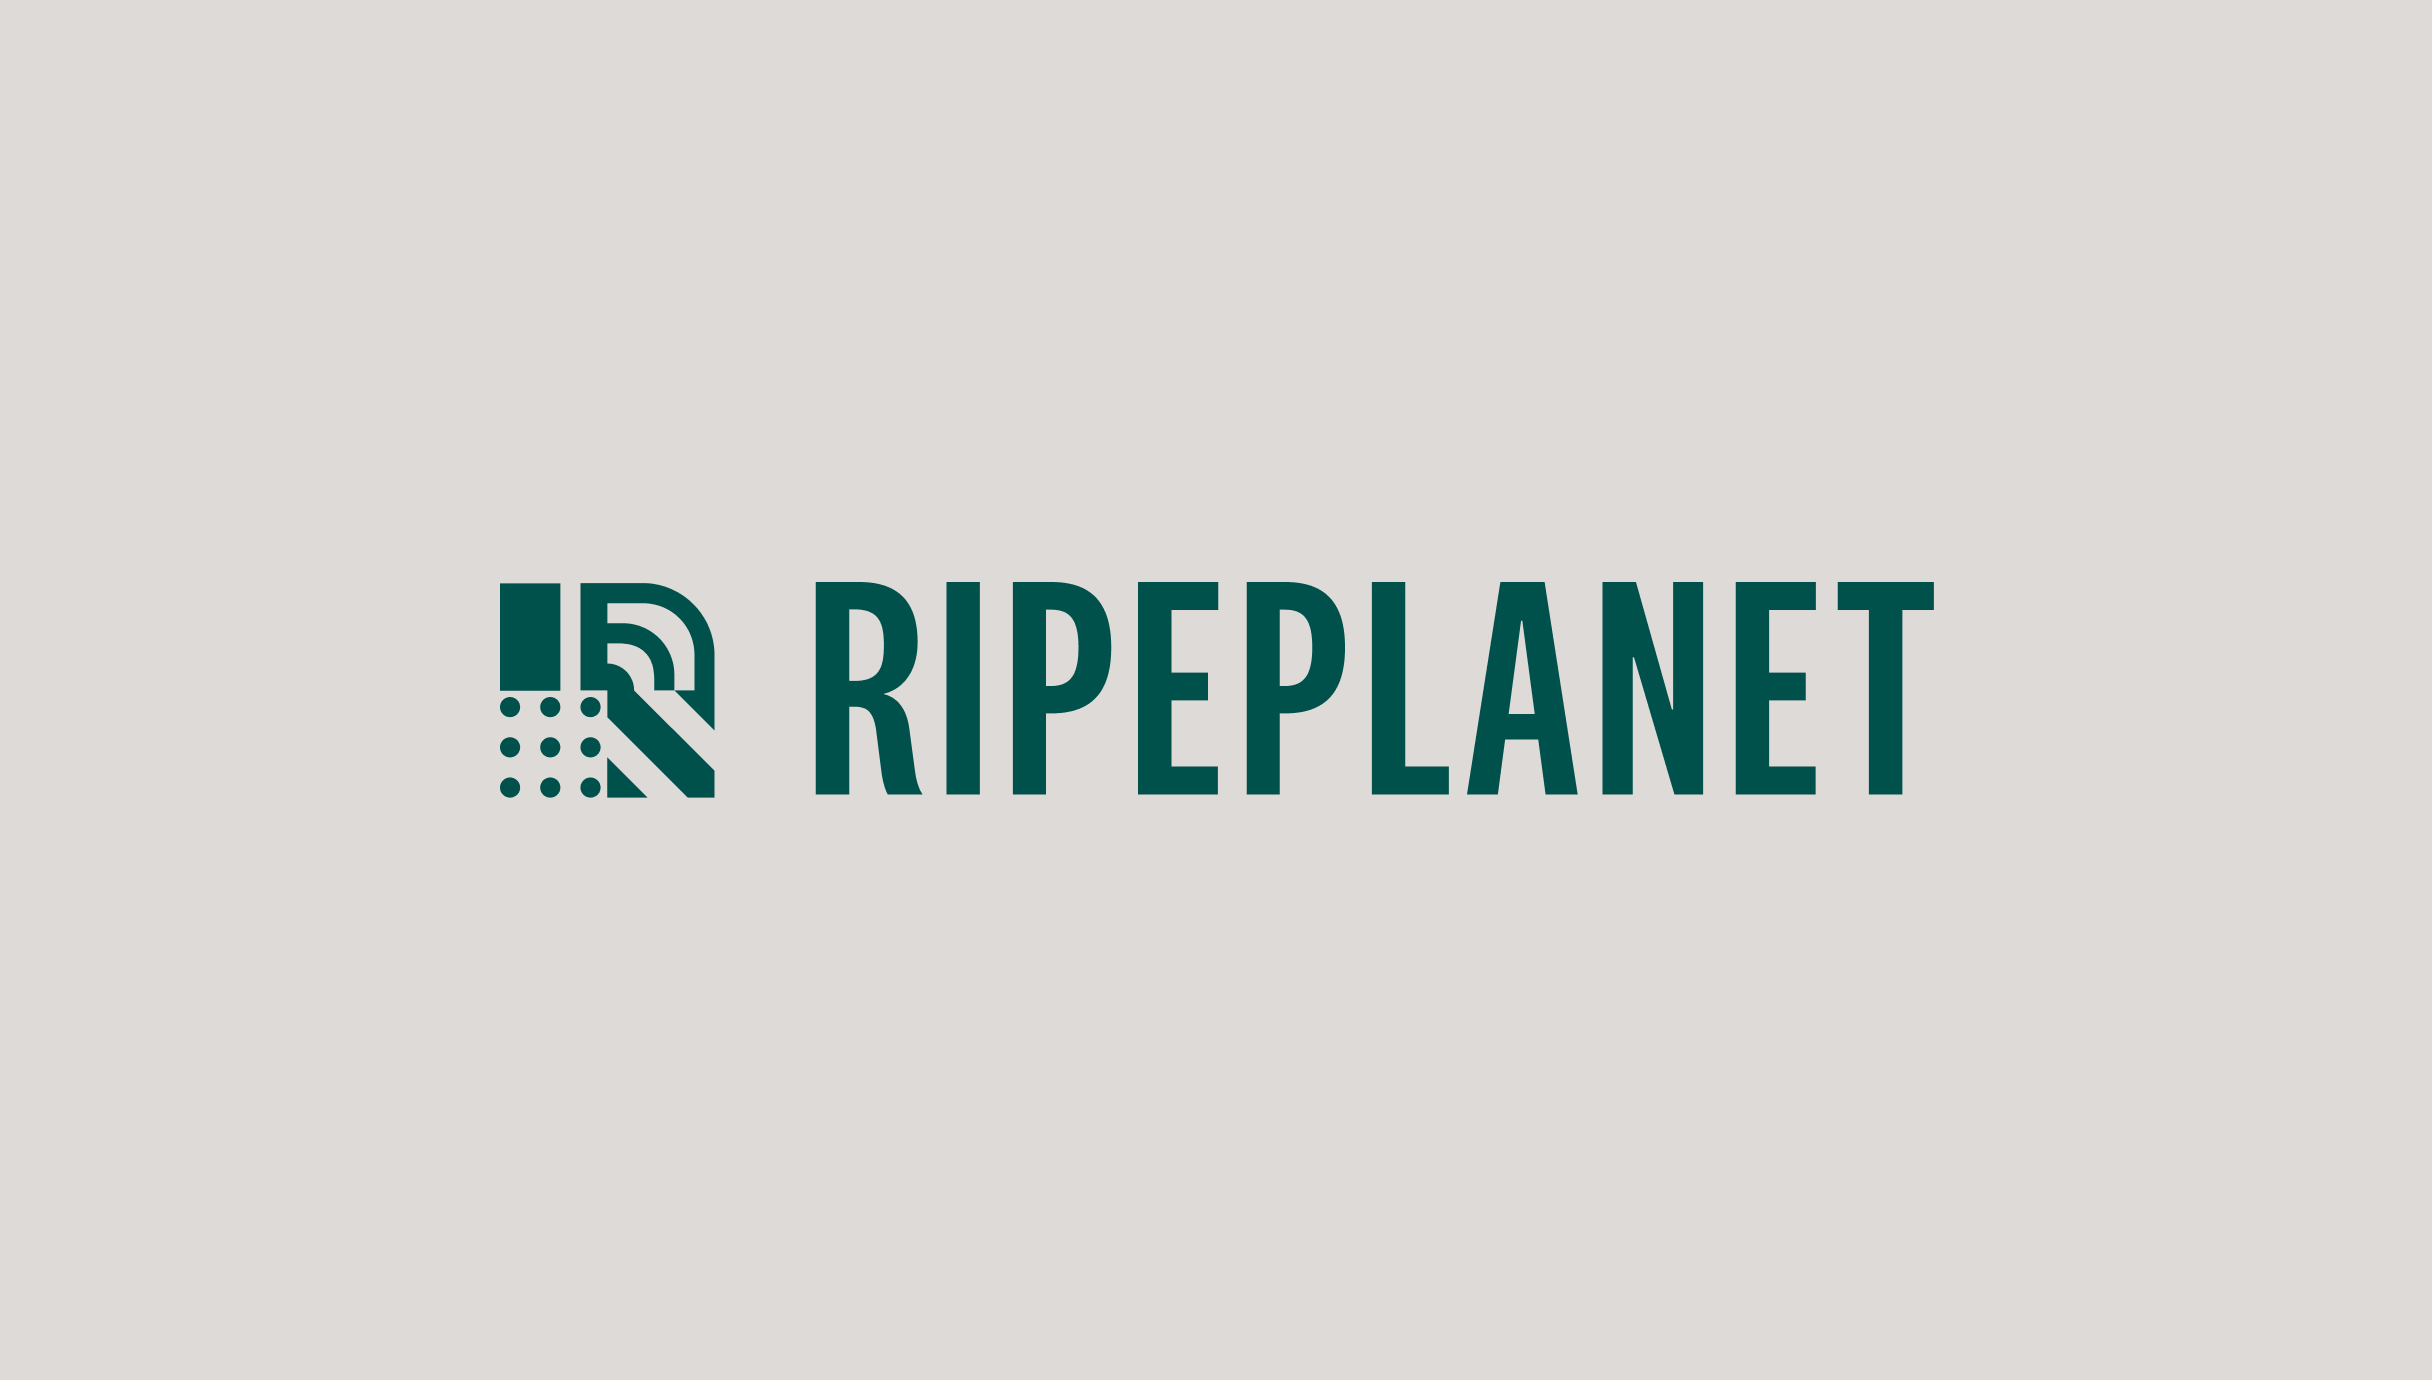 New Ripe Planet brand and logo